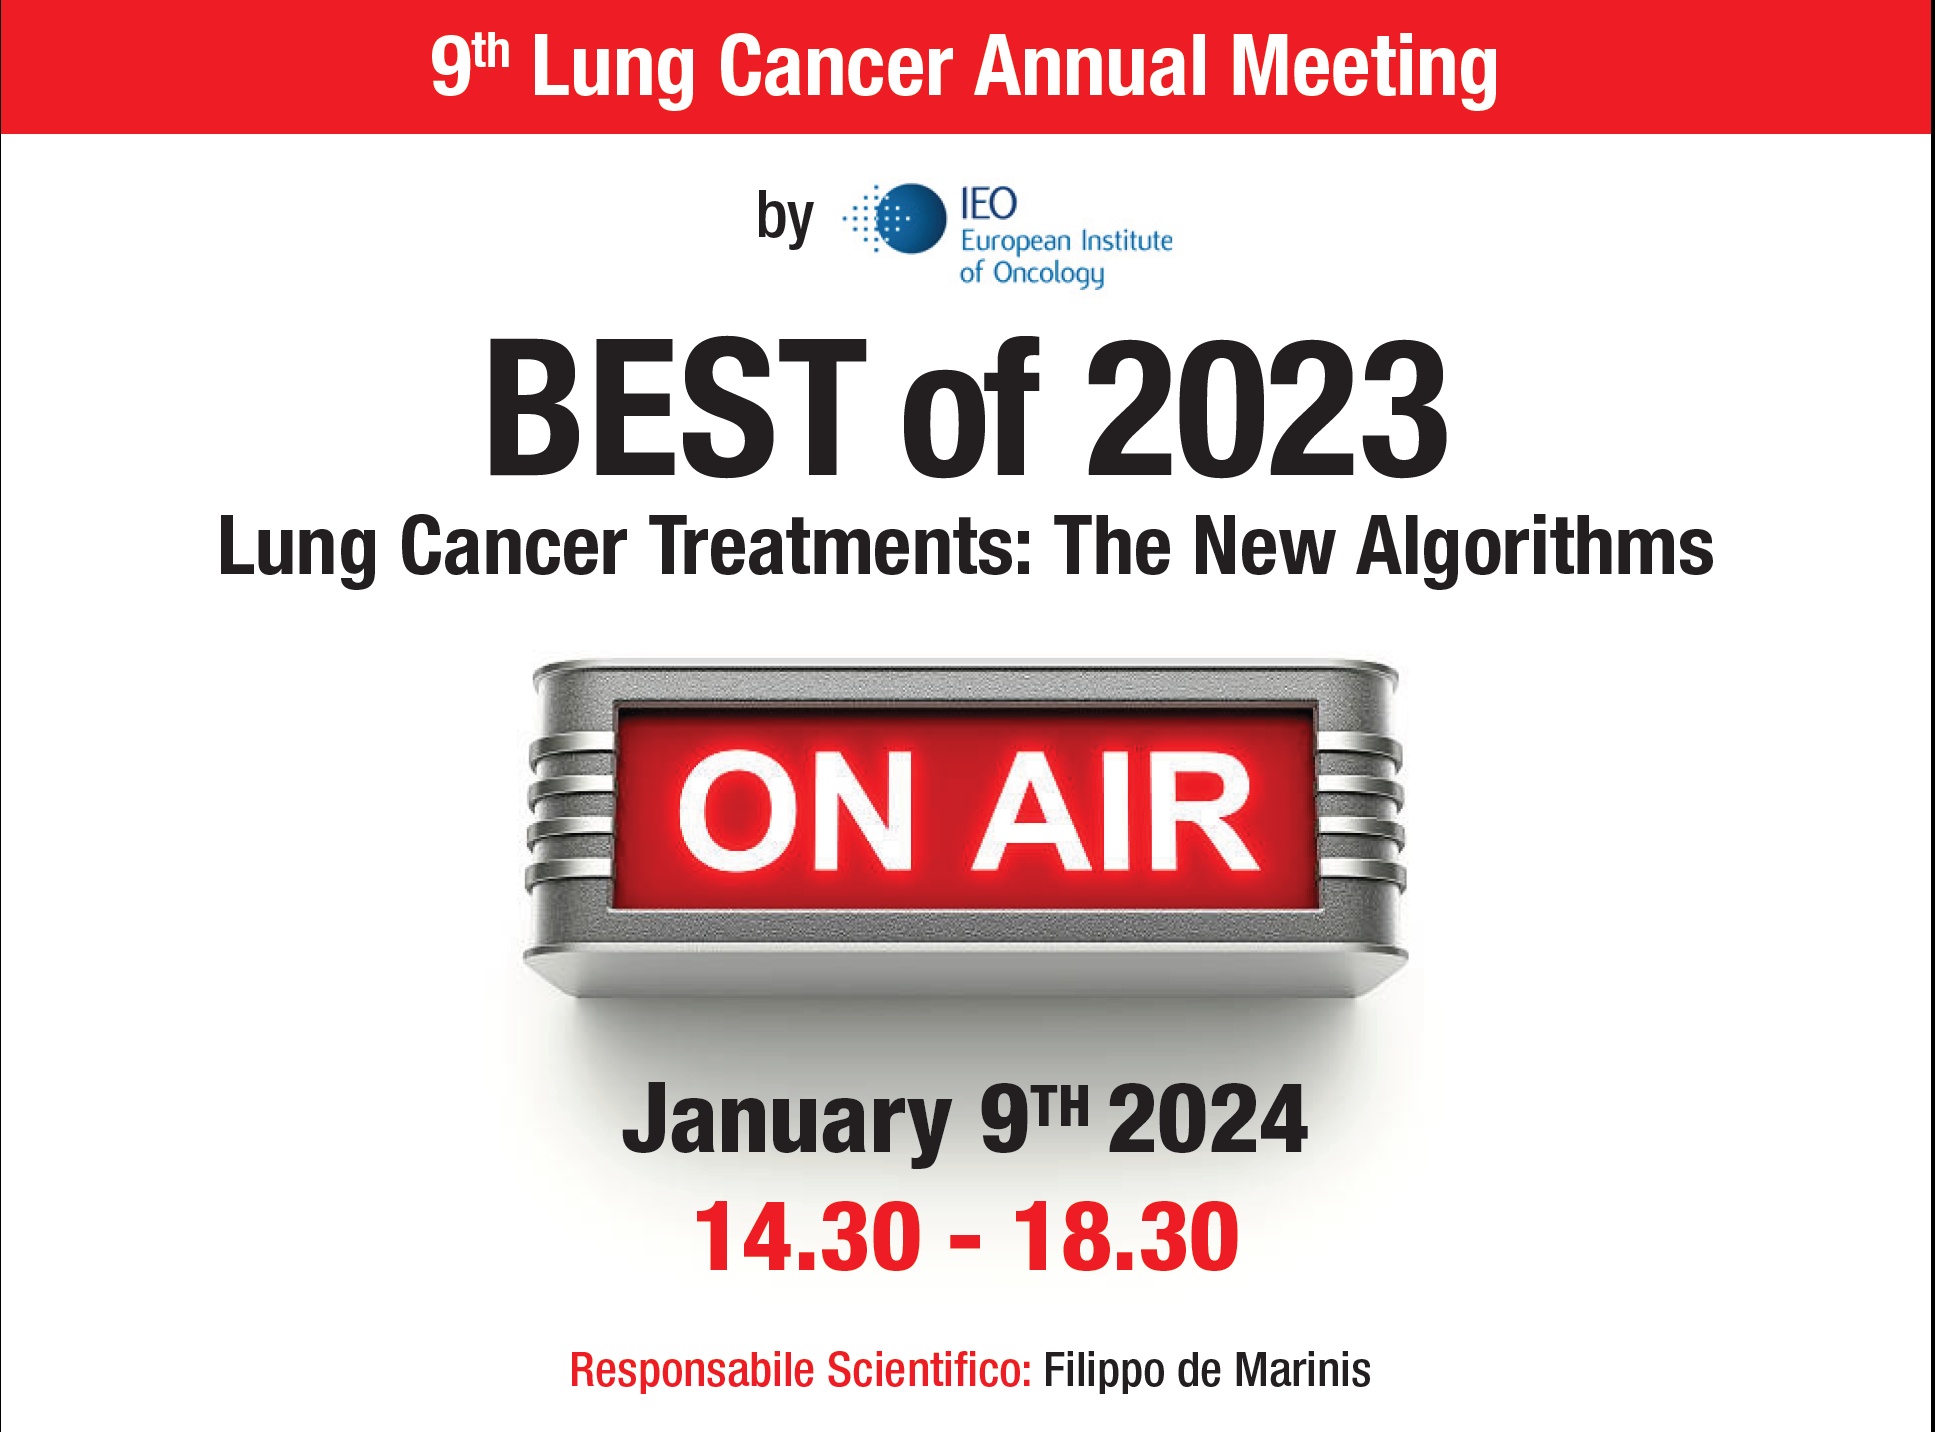 FAD - LUNG CANCER TREATMENTS - BEST OF 2023 THE NEW ALGORITHMS